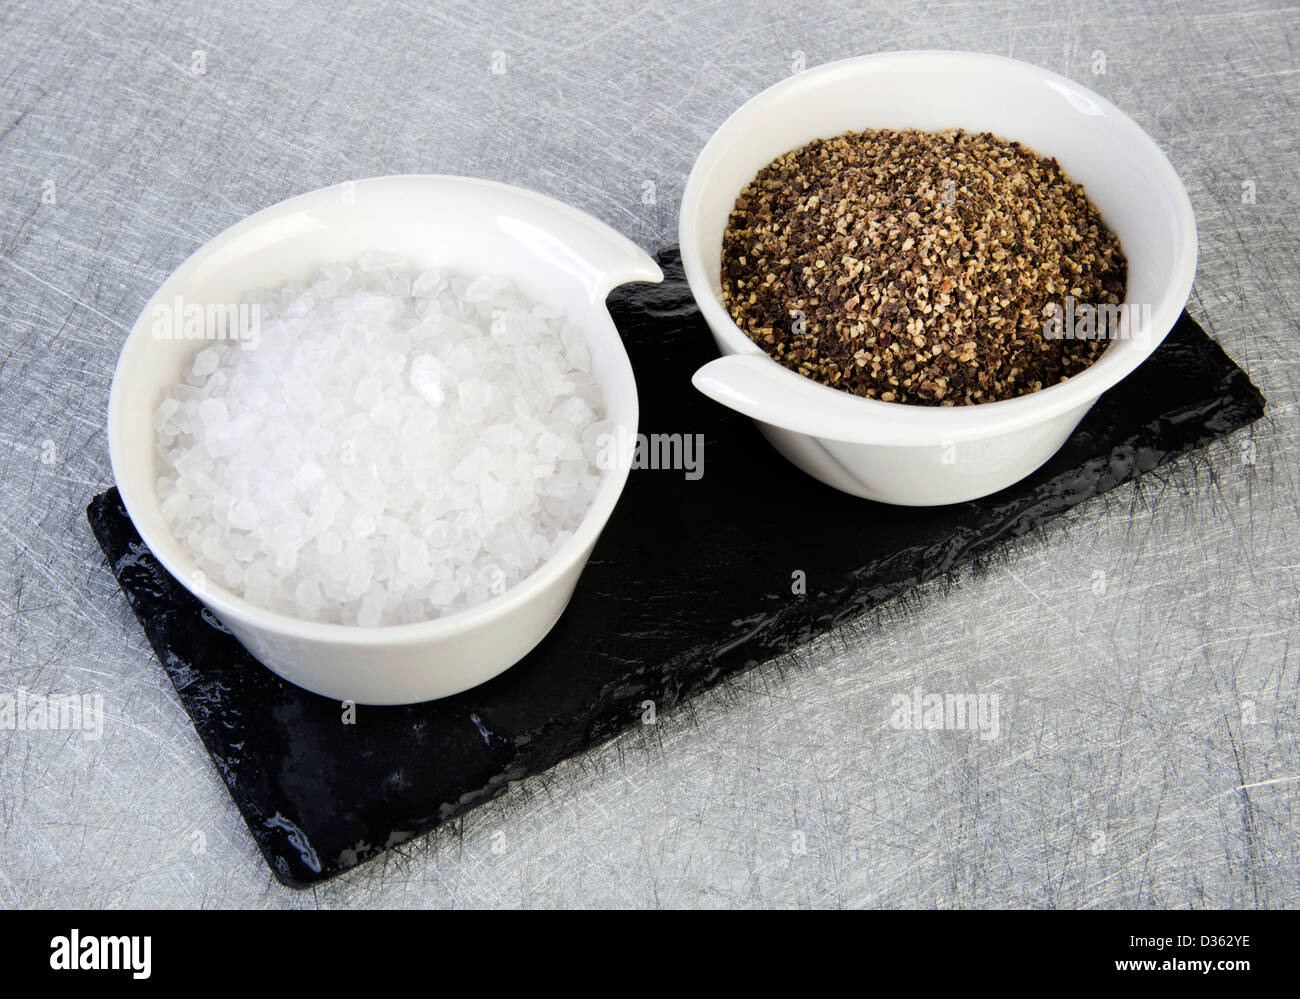 SALT AND PEPPER BOWLS Stock Photo